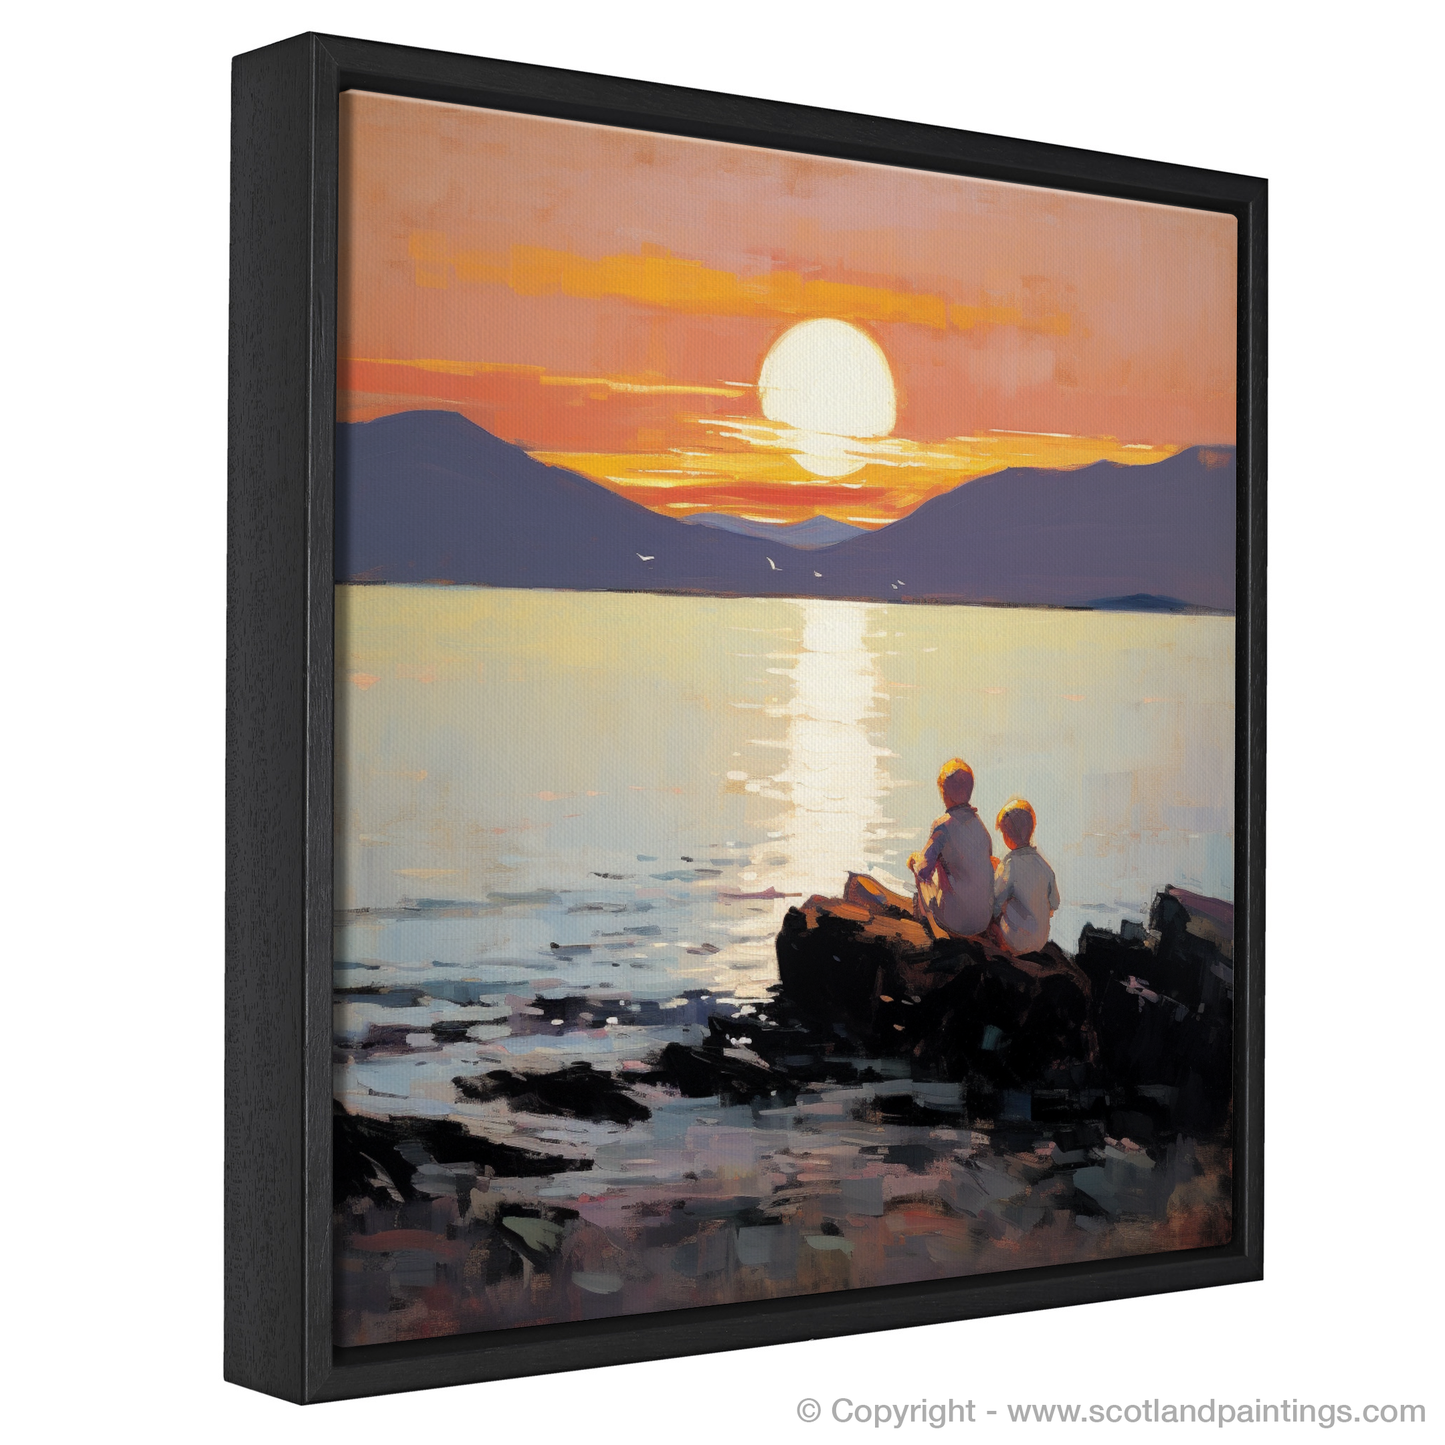 Painting and Art Print of Young explorers watching the sunset over the Isle of Arran from the peaceful Saltcoats Beach entitled "Sunset Serenity on Saltcoats Beach".